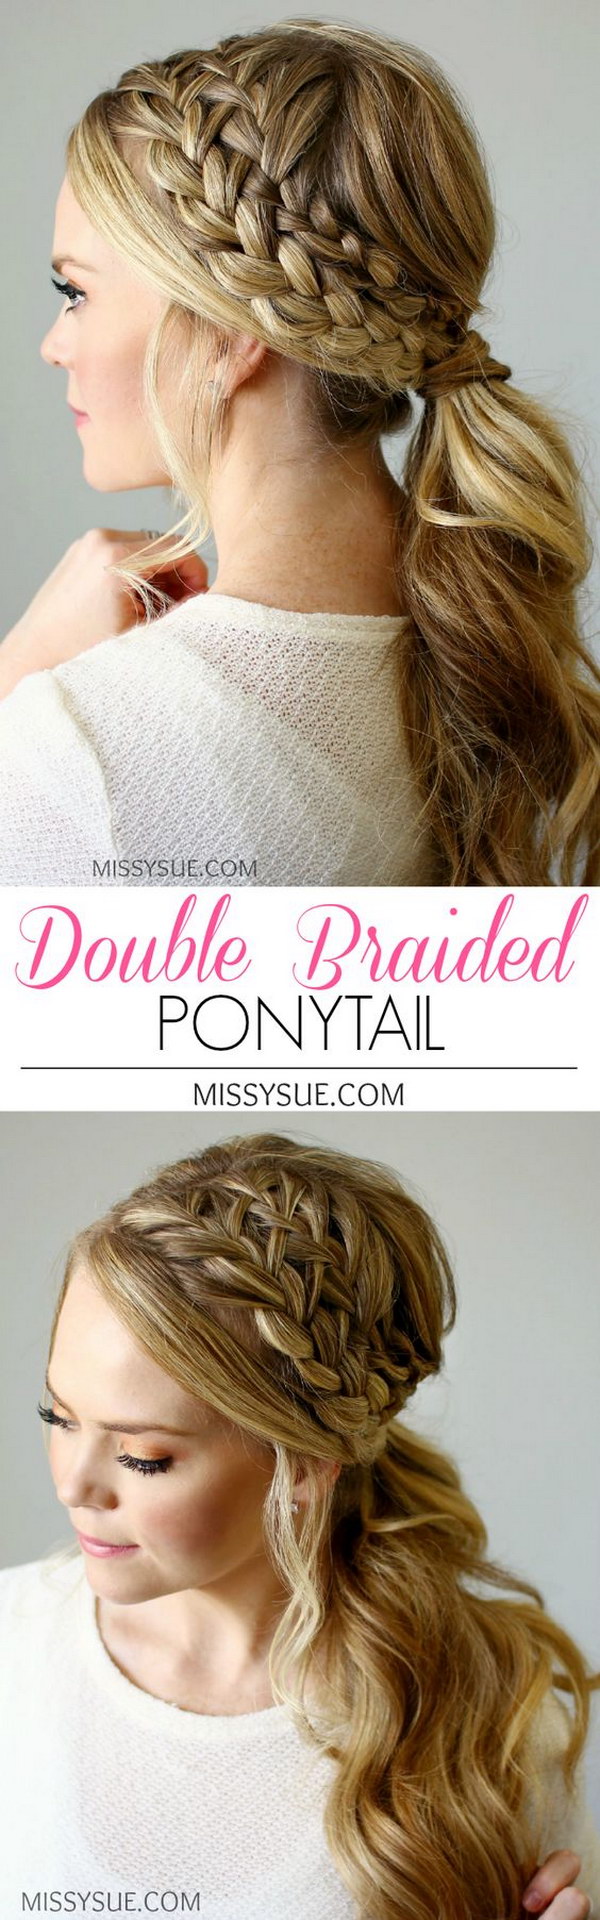 Double Braided Ponytail How To 